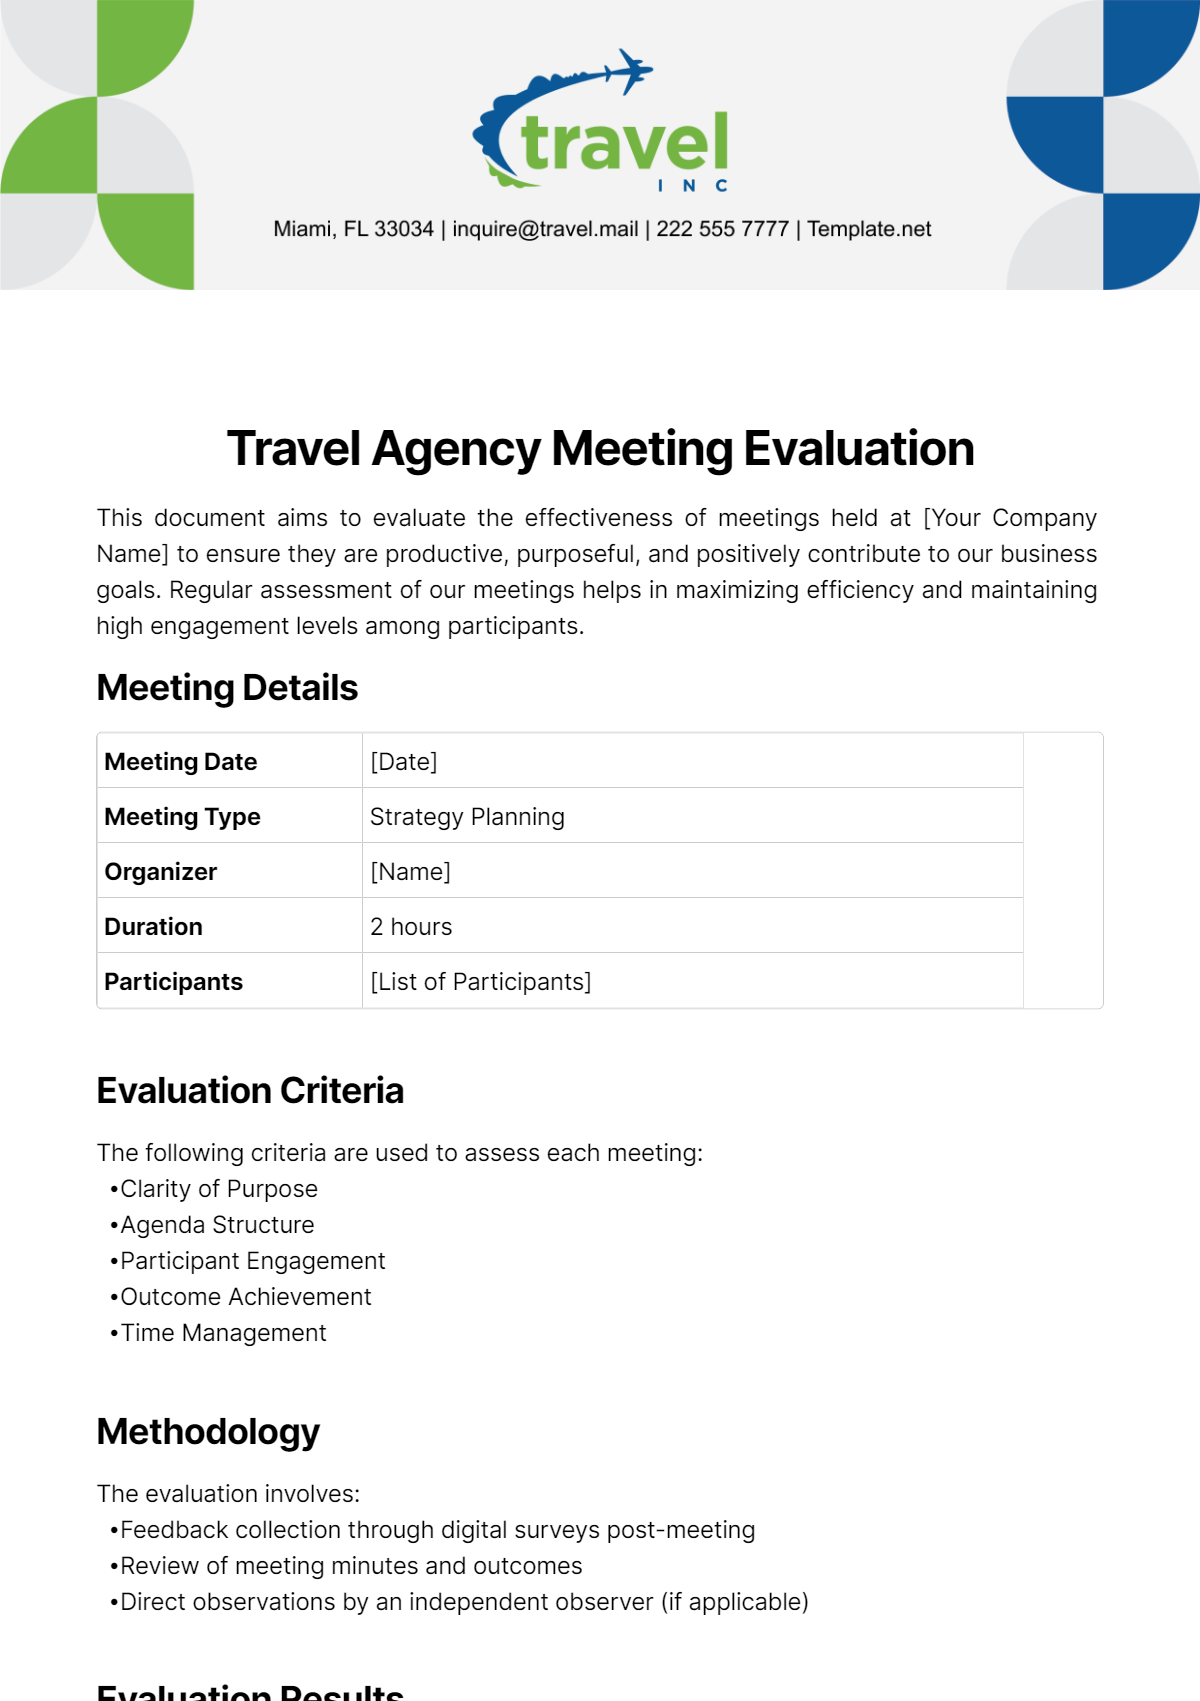 Travel Agency Meeting Evaluation Template